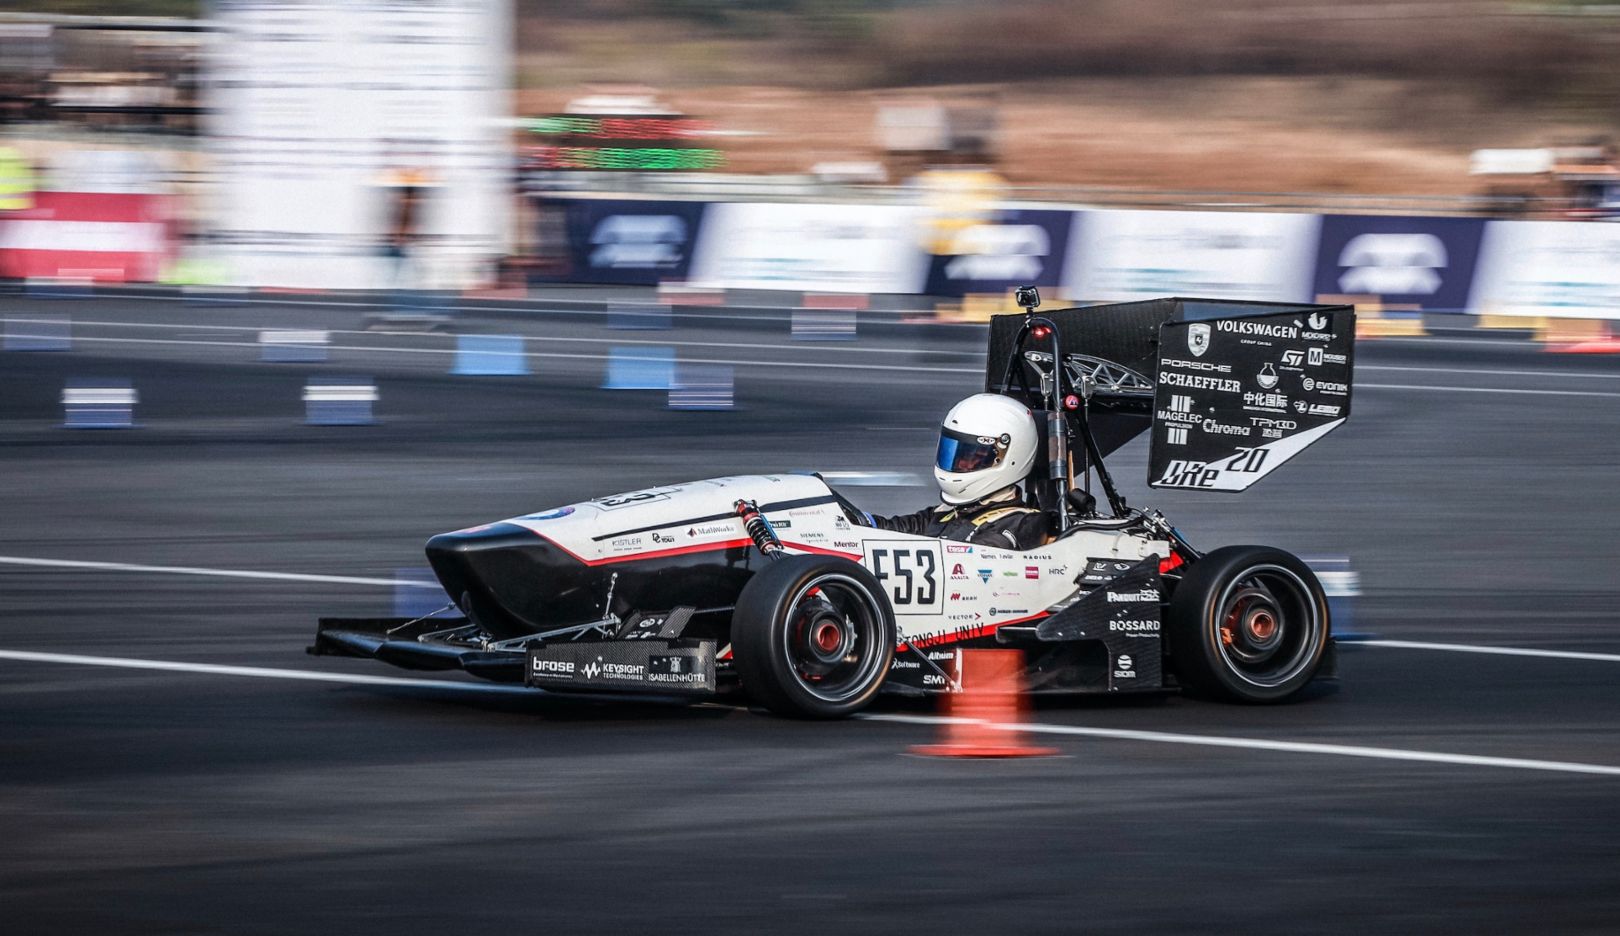 The winning car: Liu Fan's team and the DRe20 come out ahead of sixty-six rivals in the all-electric competition. Design and performance are a perfect fit.